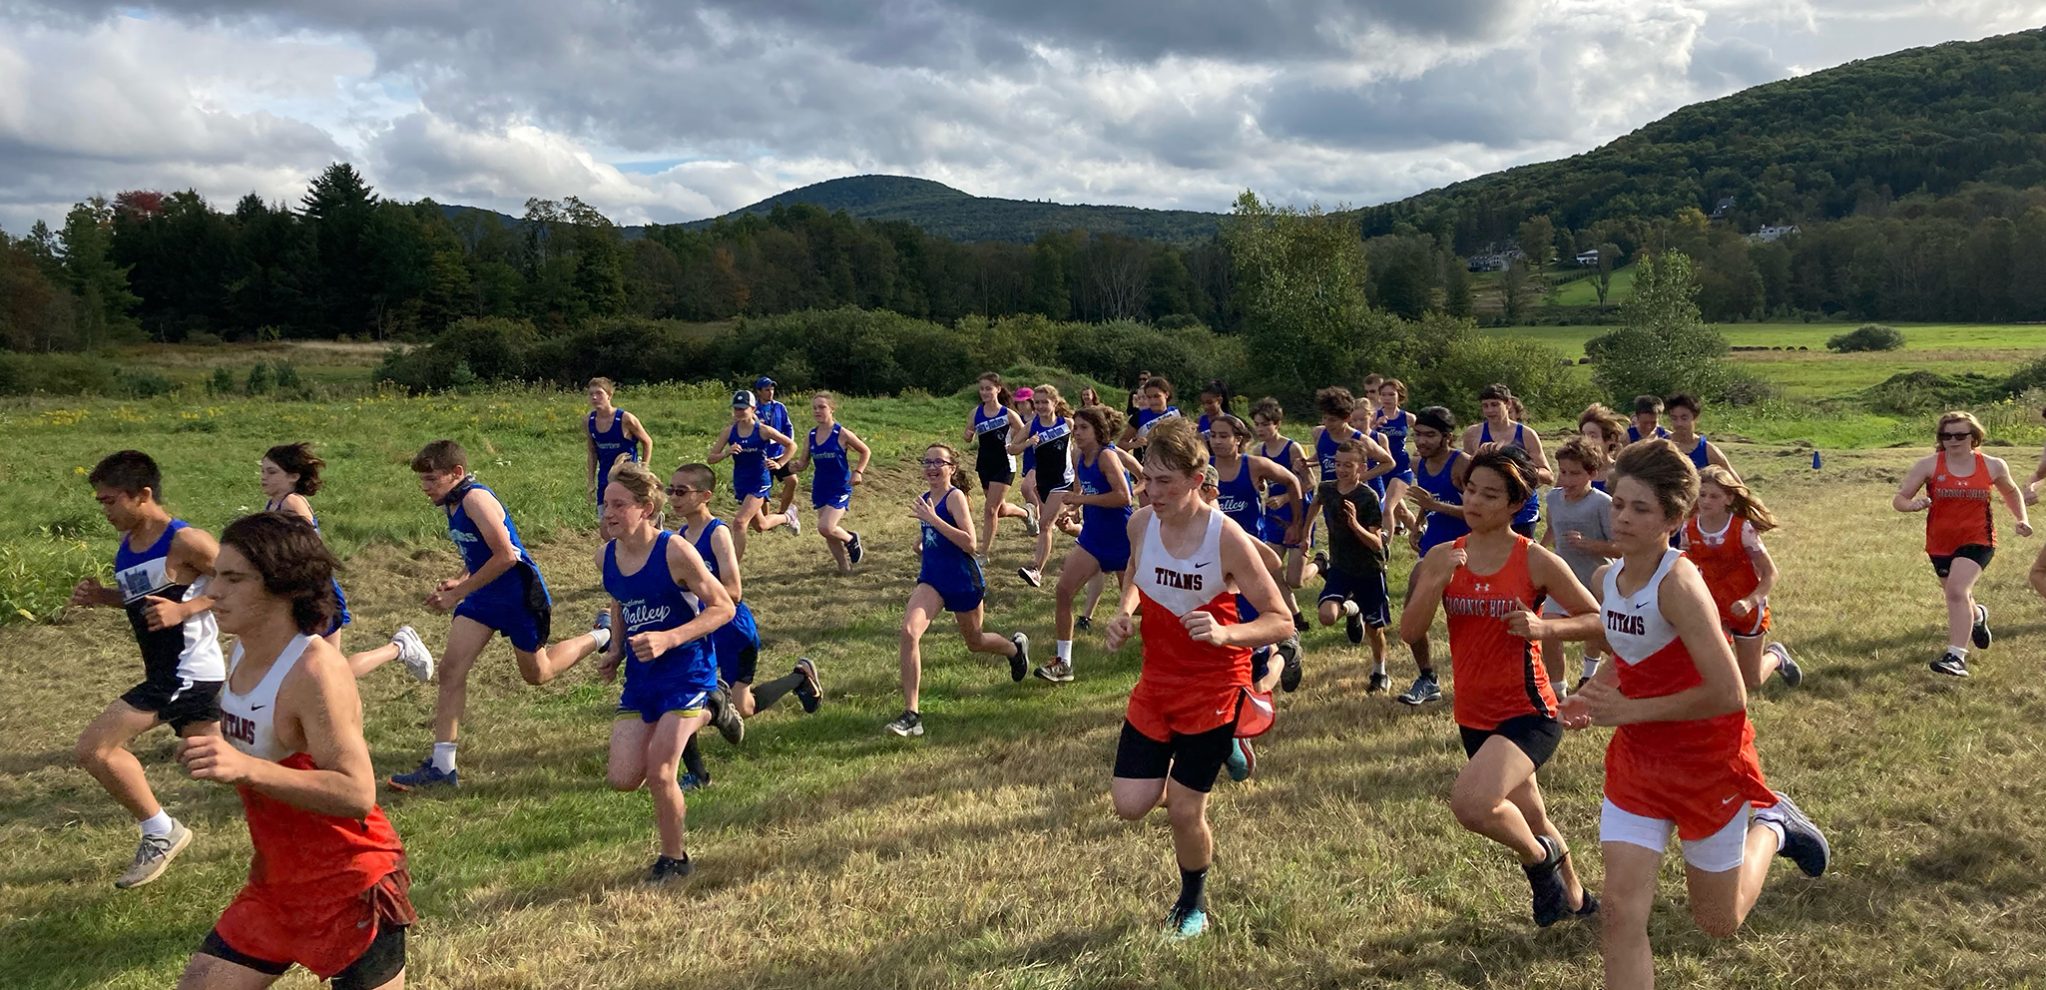 Cross country runners at the start of a race; there are mountains in the background